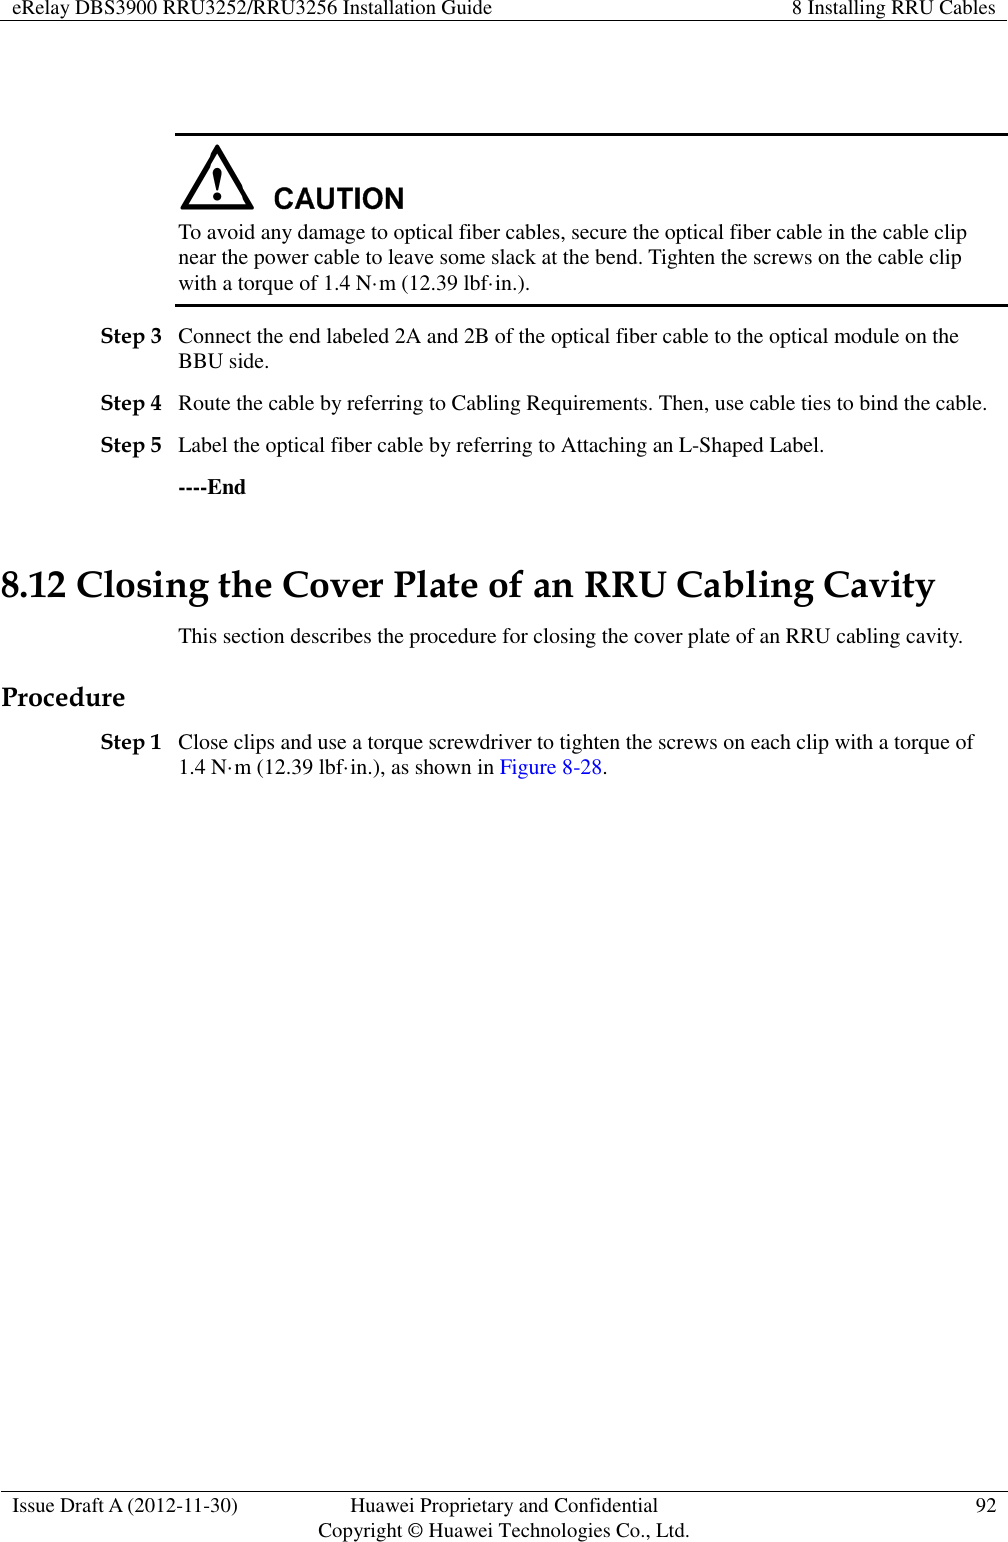 eRelay DBS3900 RRU3252/RRU3256 Installation Guide 8 Installing RRU Cables  Issue Draft A (2012-11-30) Huawei Proprietary and Confidential                                     Copyright © Huawei Technologies Co., Ltd. 92     To avoid any damage to optical fiber cables, secure the optical fiber cable in the cable clip near the power cable to leave some slack at the bend. Tighten the screws on the cable clip with a torque of 1.4 N·m (12.39 lbf·in.). Step 3 Connect the end labeled 2A and 2B of the optical fiber cable to the optical module on the BBU side. Step 4 Route the cable by referring to Cabling Requirements. Then, use cable ties to bind the cable. Step 5 Label the optical fiber cable by referring to Attaching an L-Shaped Label. ----End 8.12 Closing the Cover Plate of an RRU Cabling Cavity This section describes the procedure for closing the cover plate of an RRU cabling cavity. Procedure Step 1 Close clips and use a torque screwdriver to tighten the screws on each clip with a torque of 1.4 N·m (12.39 lbf·in.), as shown in Figure 8-28. 